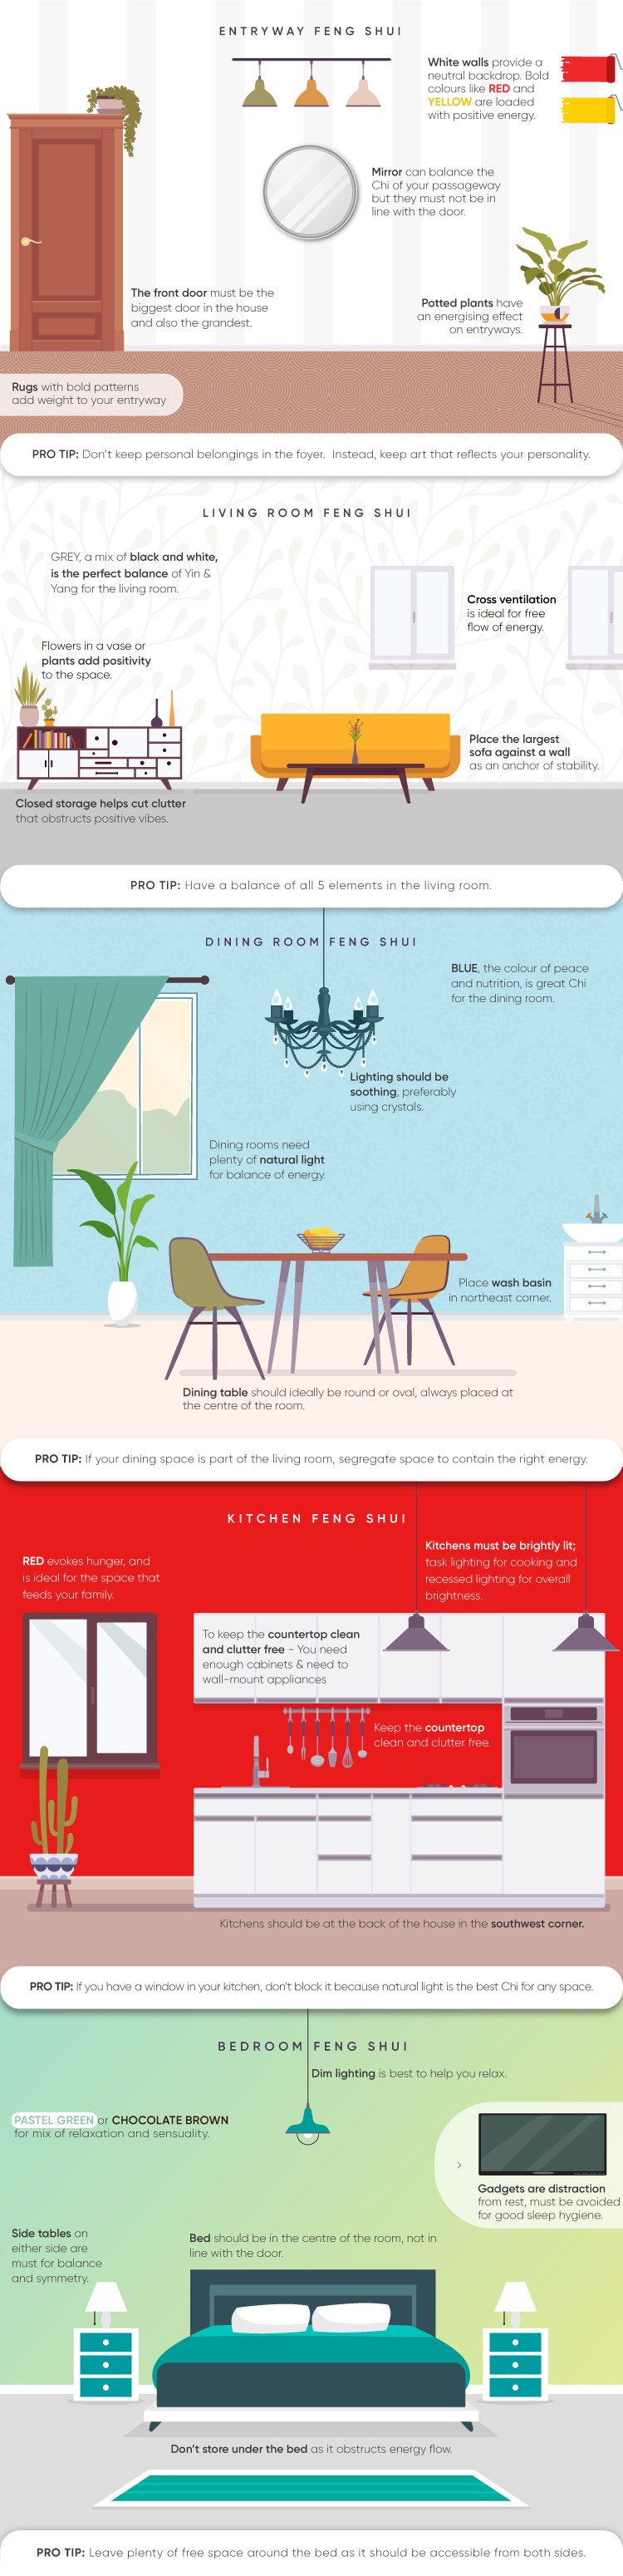 Infographic: Your Guide to Feng Shui Rules